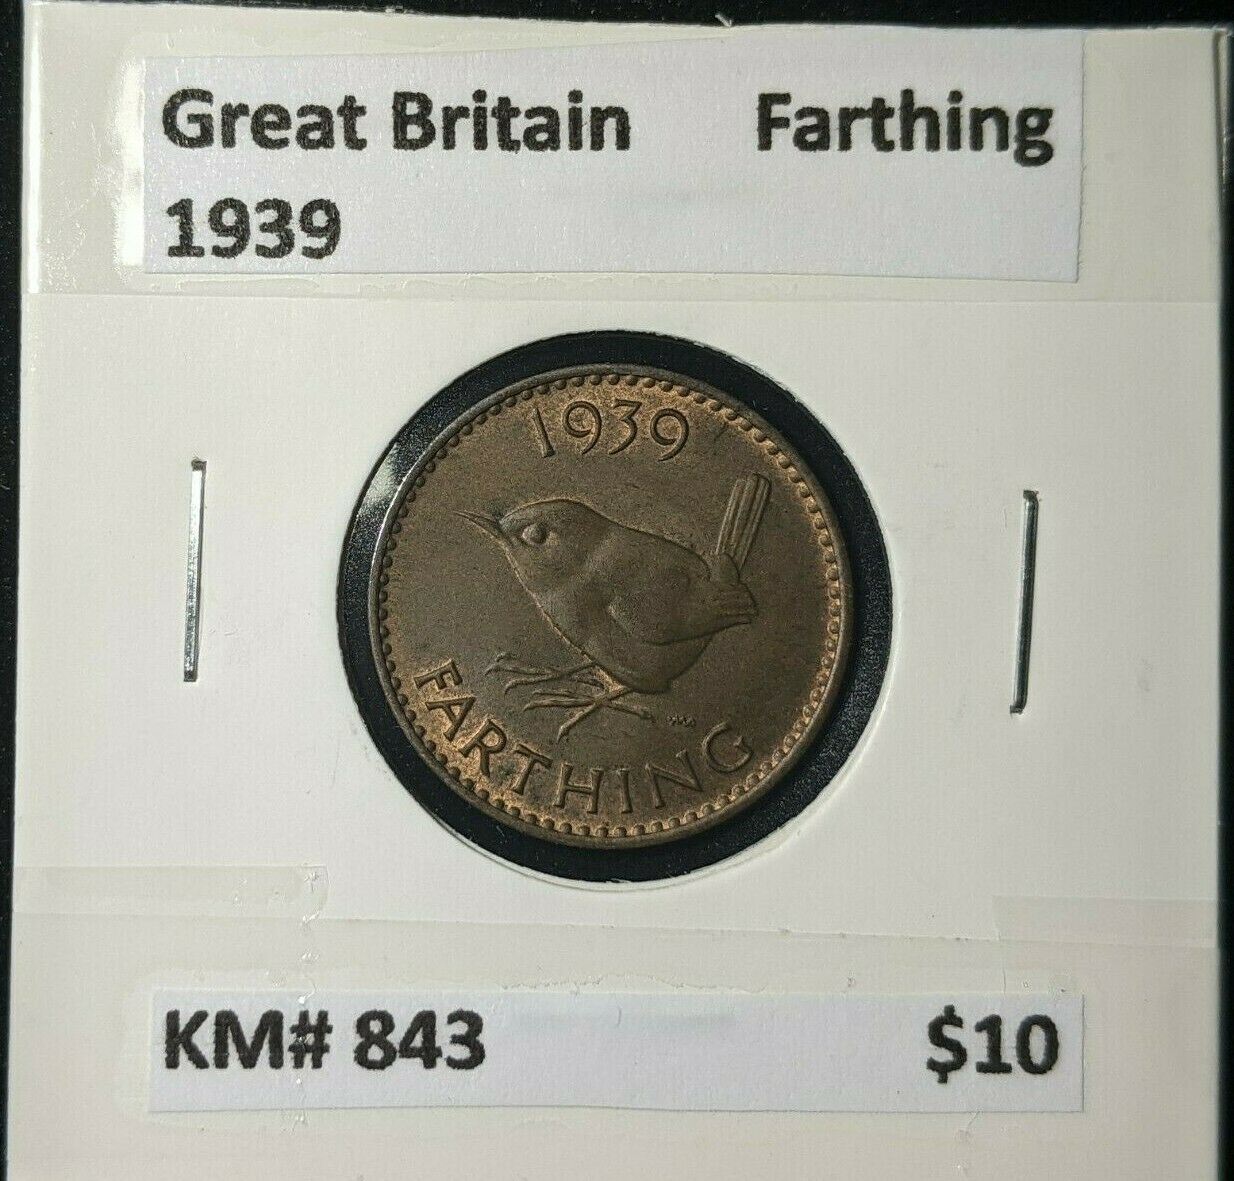 Great Britain 1939 1/4d Farthing KM# 843 #005